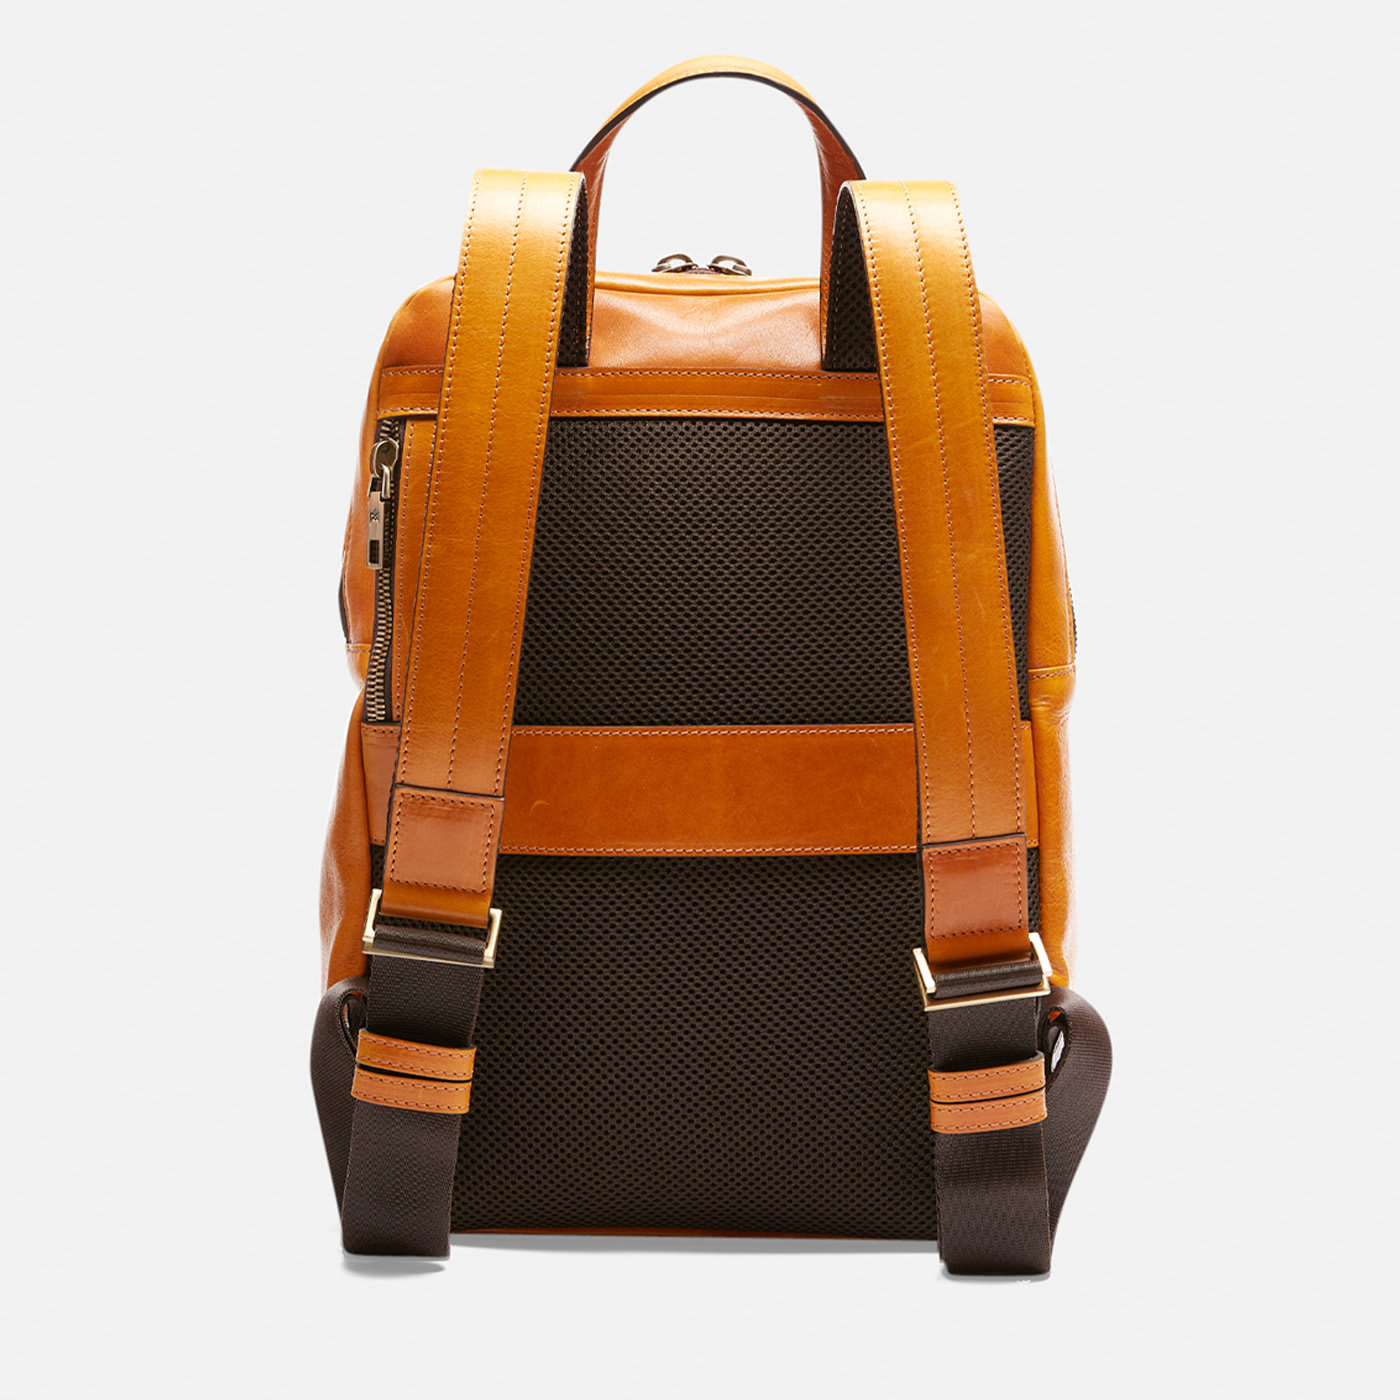 Tokyo Soft Leather Backpack - Cuoieria Fiorentina